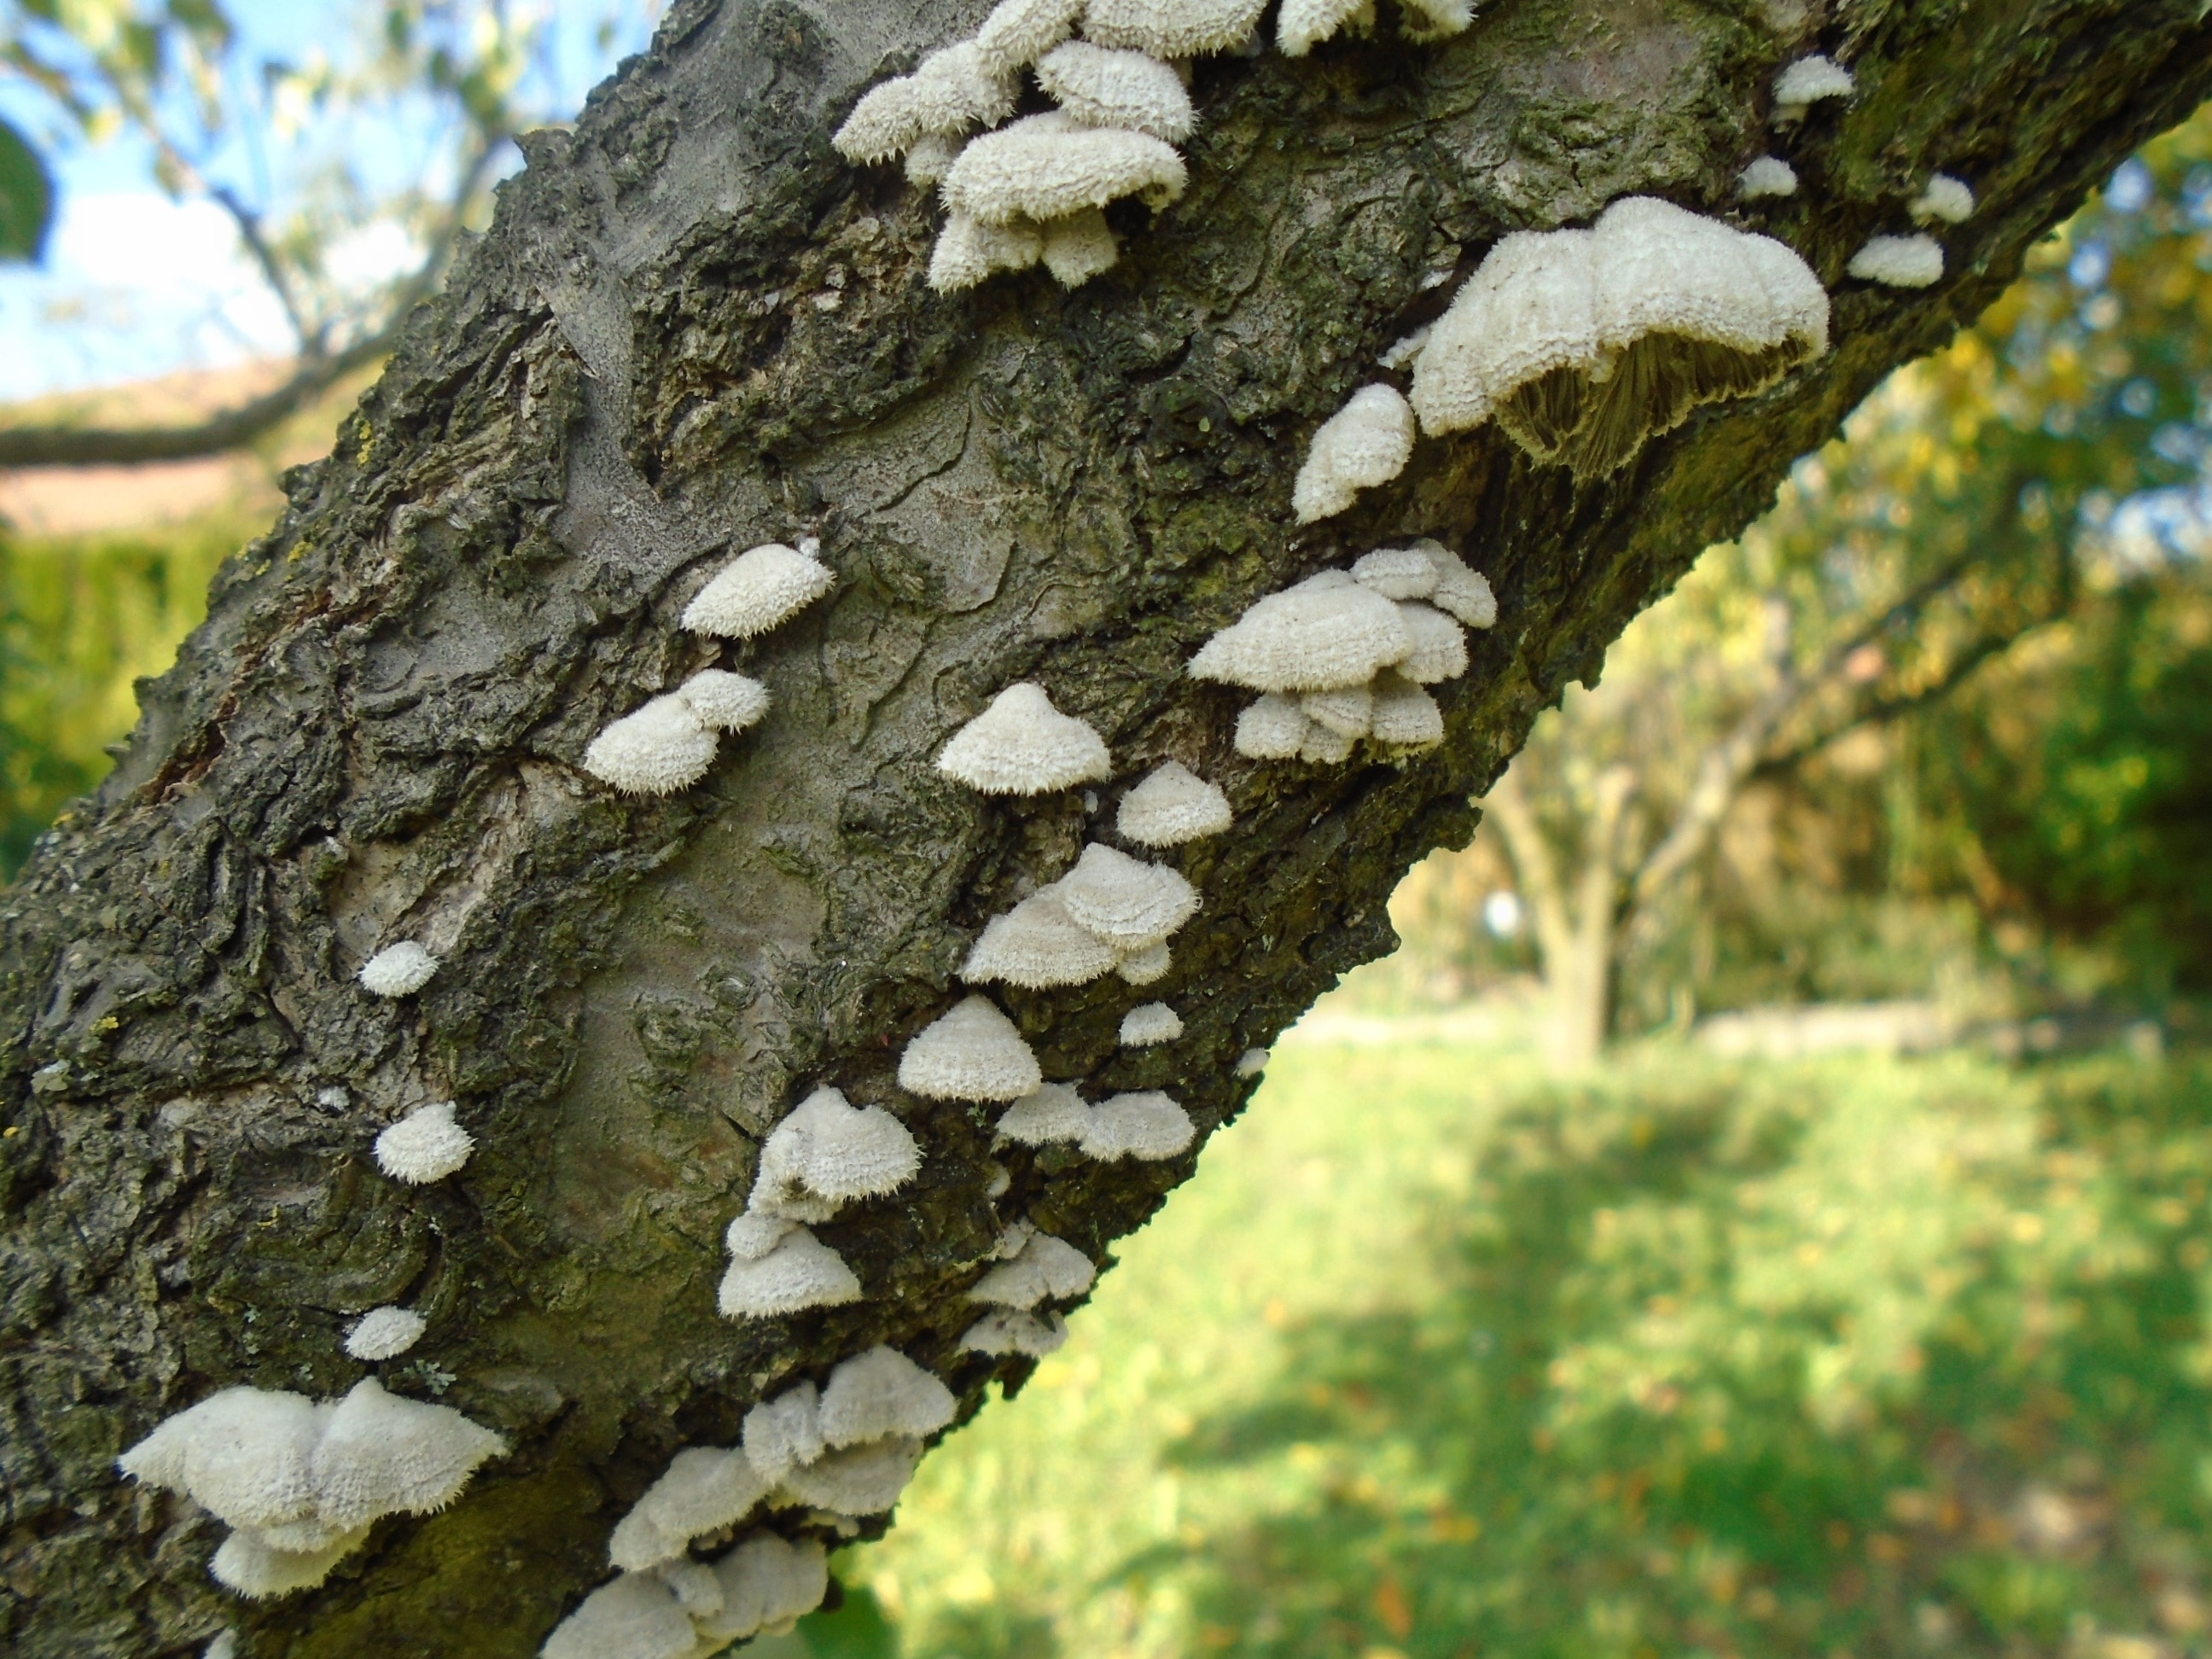 brown tree trunk with white mushrooms growing on it